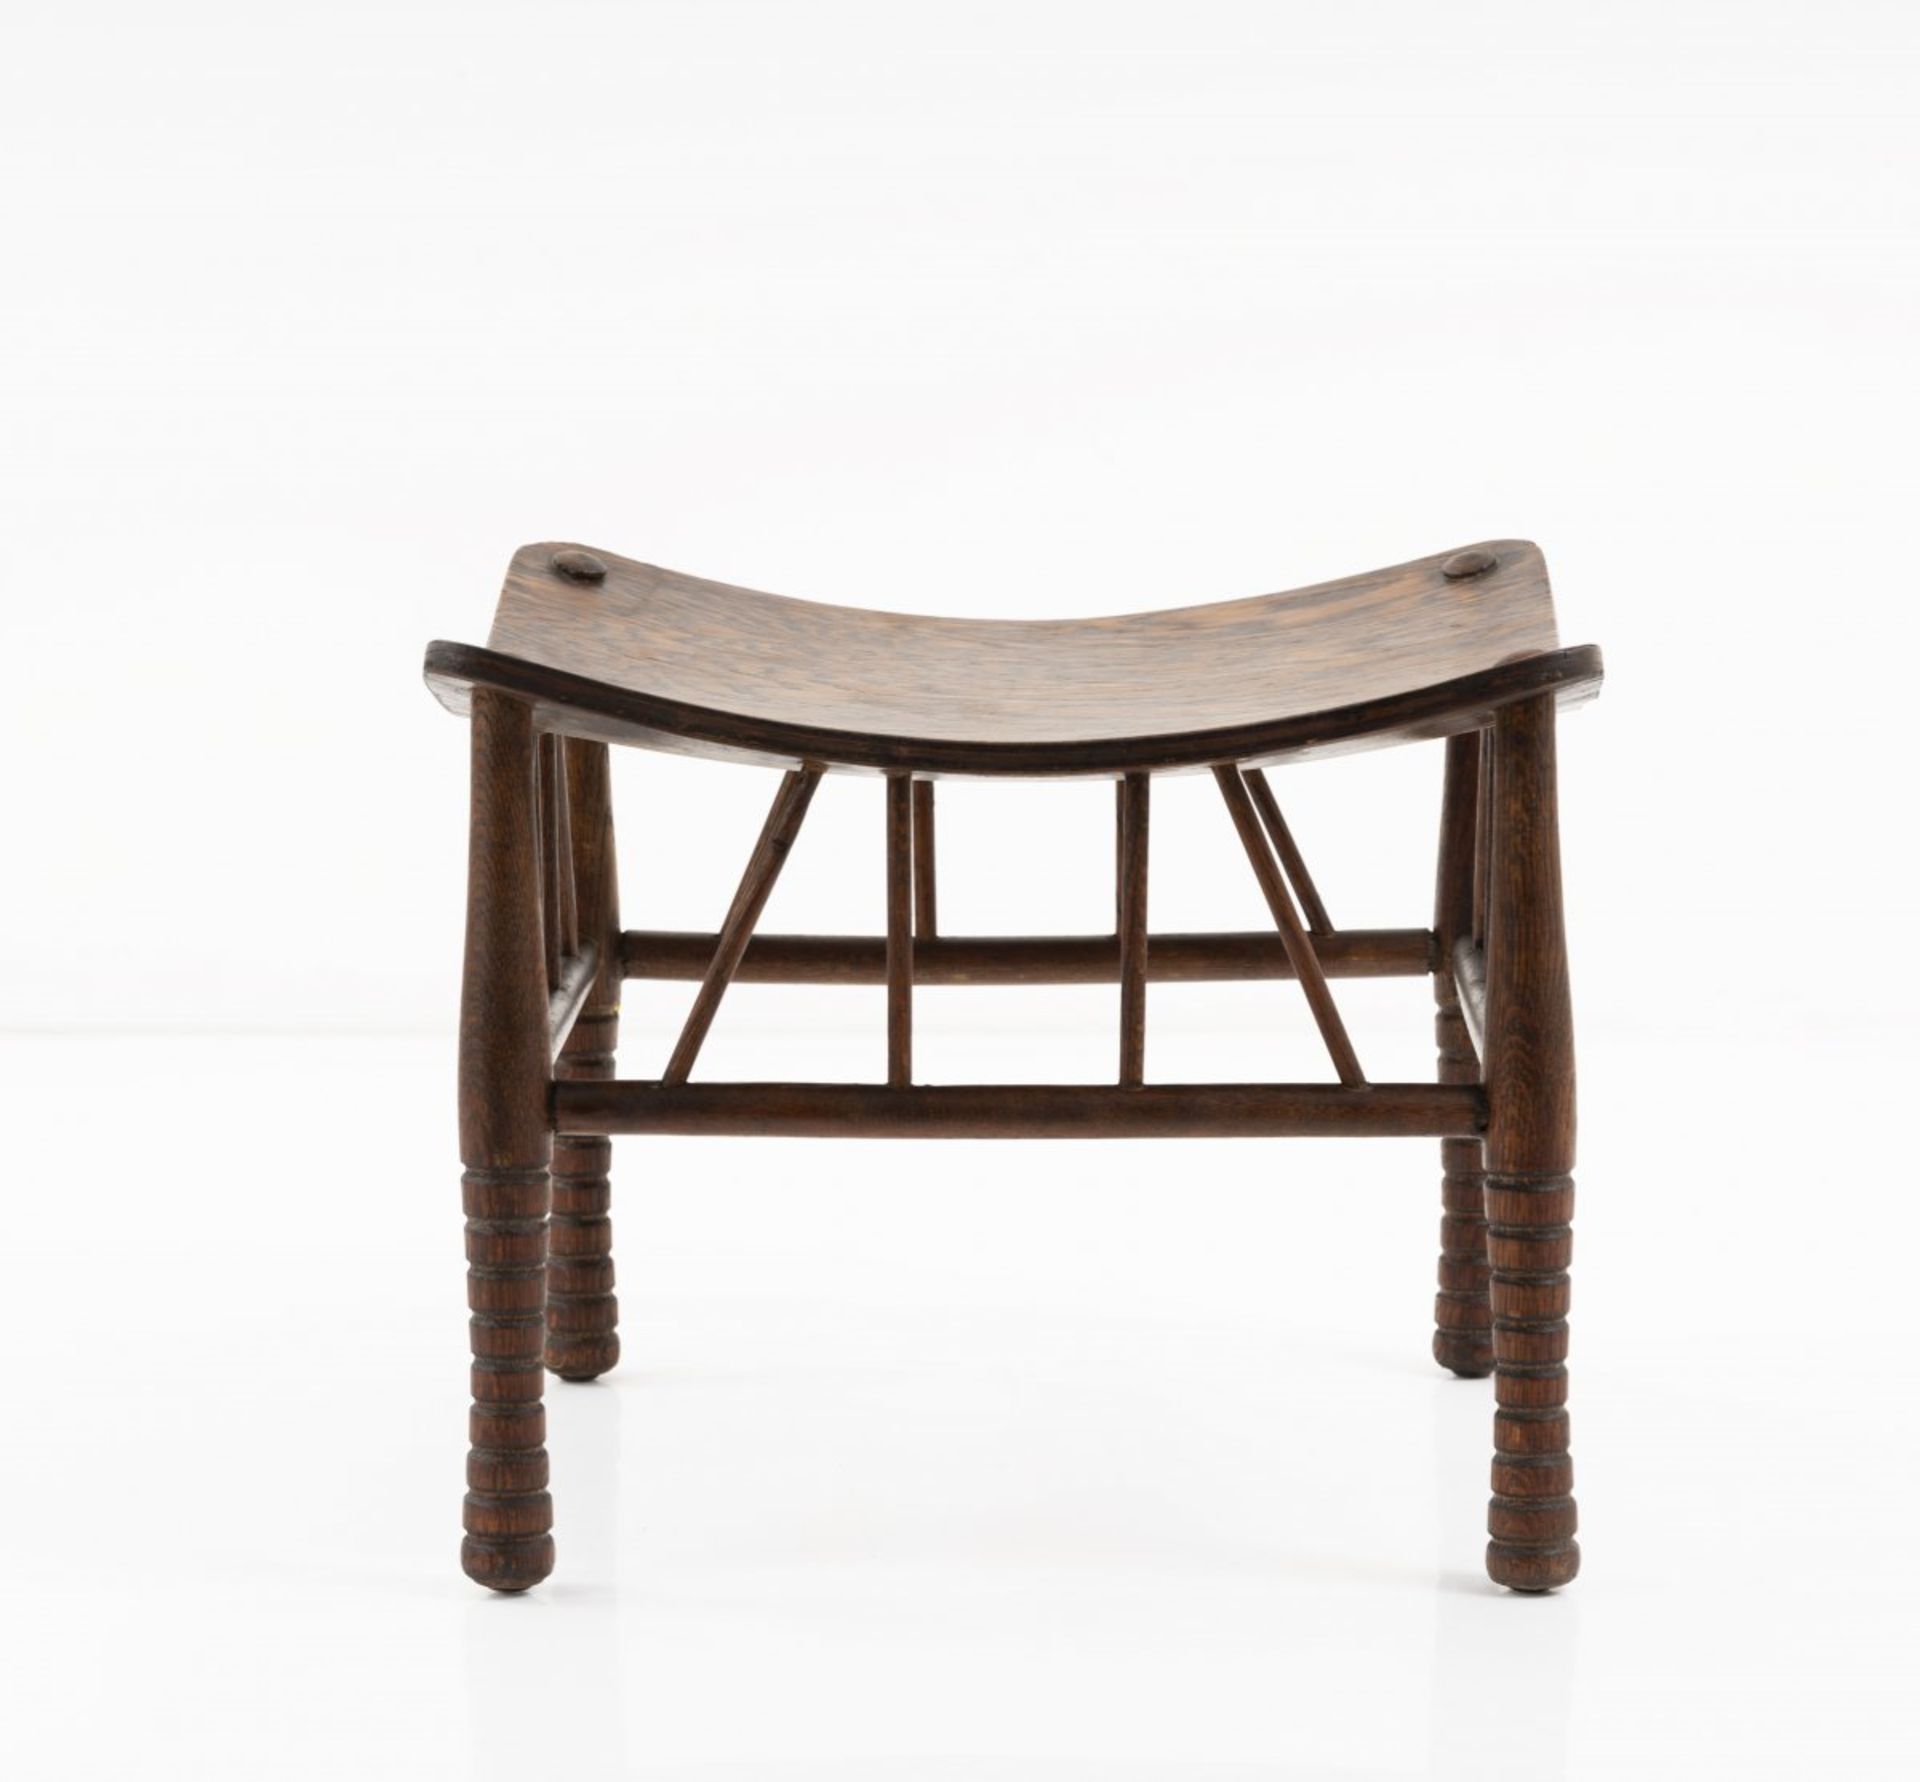 Liberty & Co., London, 'Thebes' stool, c. 1890